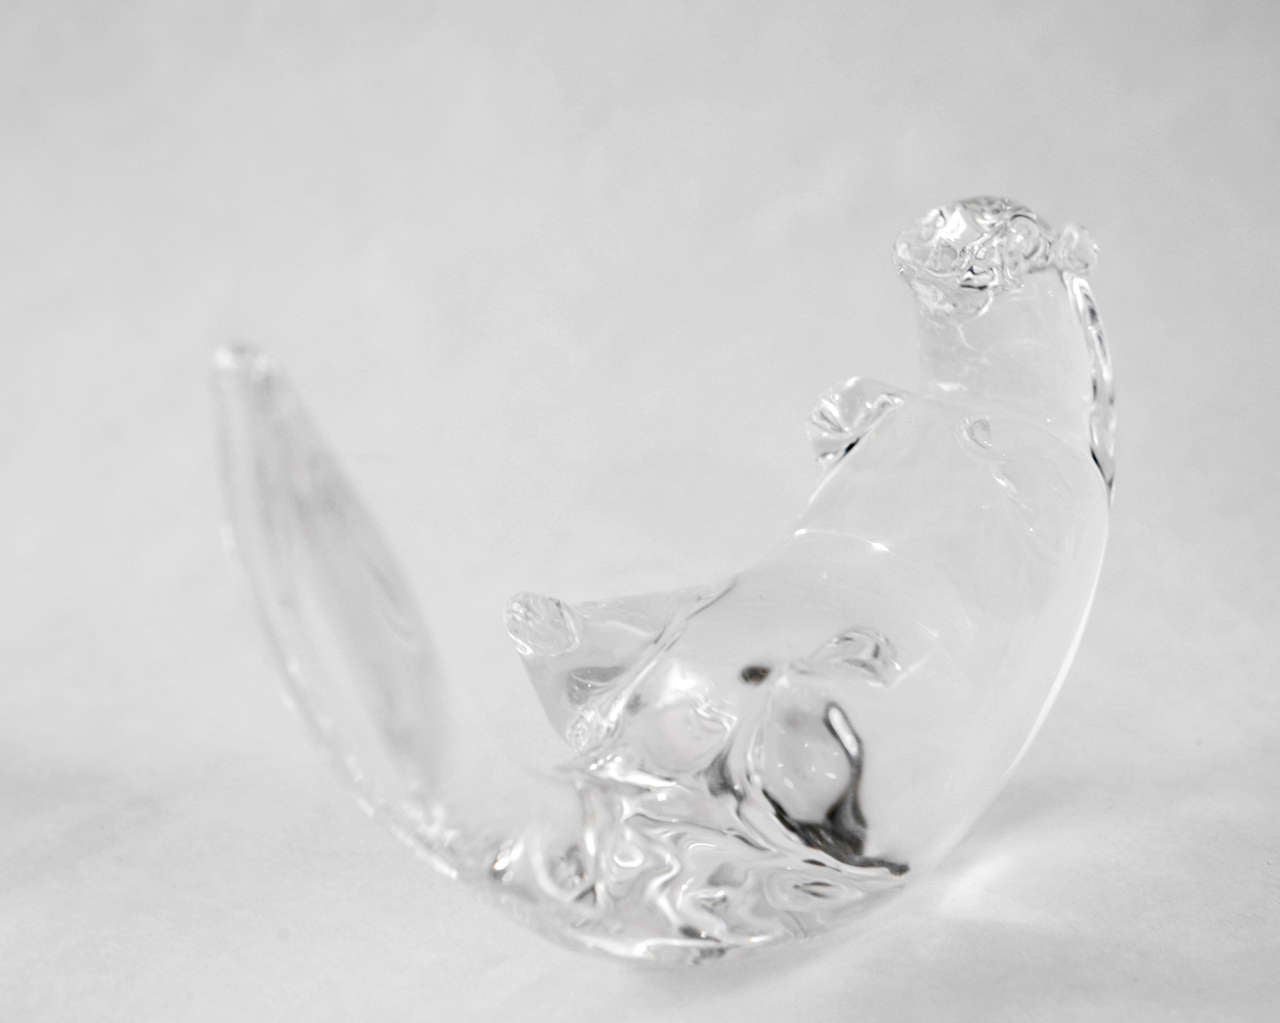 Seal, Pelican and Sea Otter by Steuben Glass 2